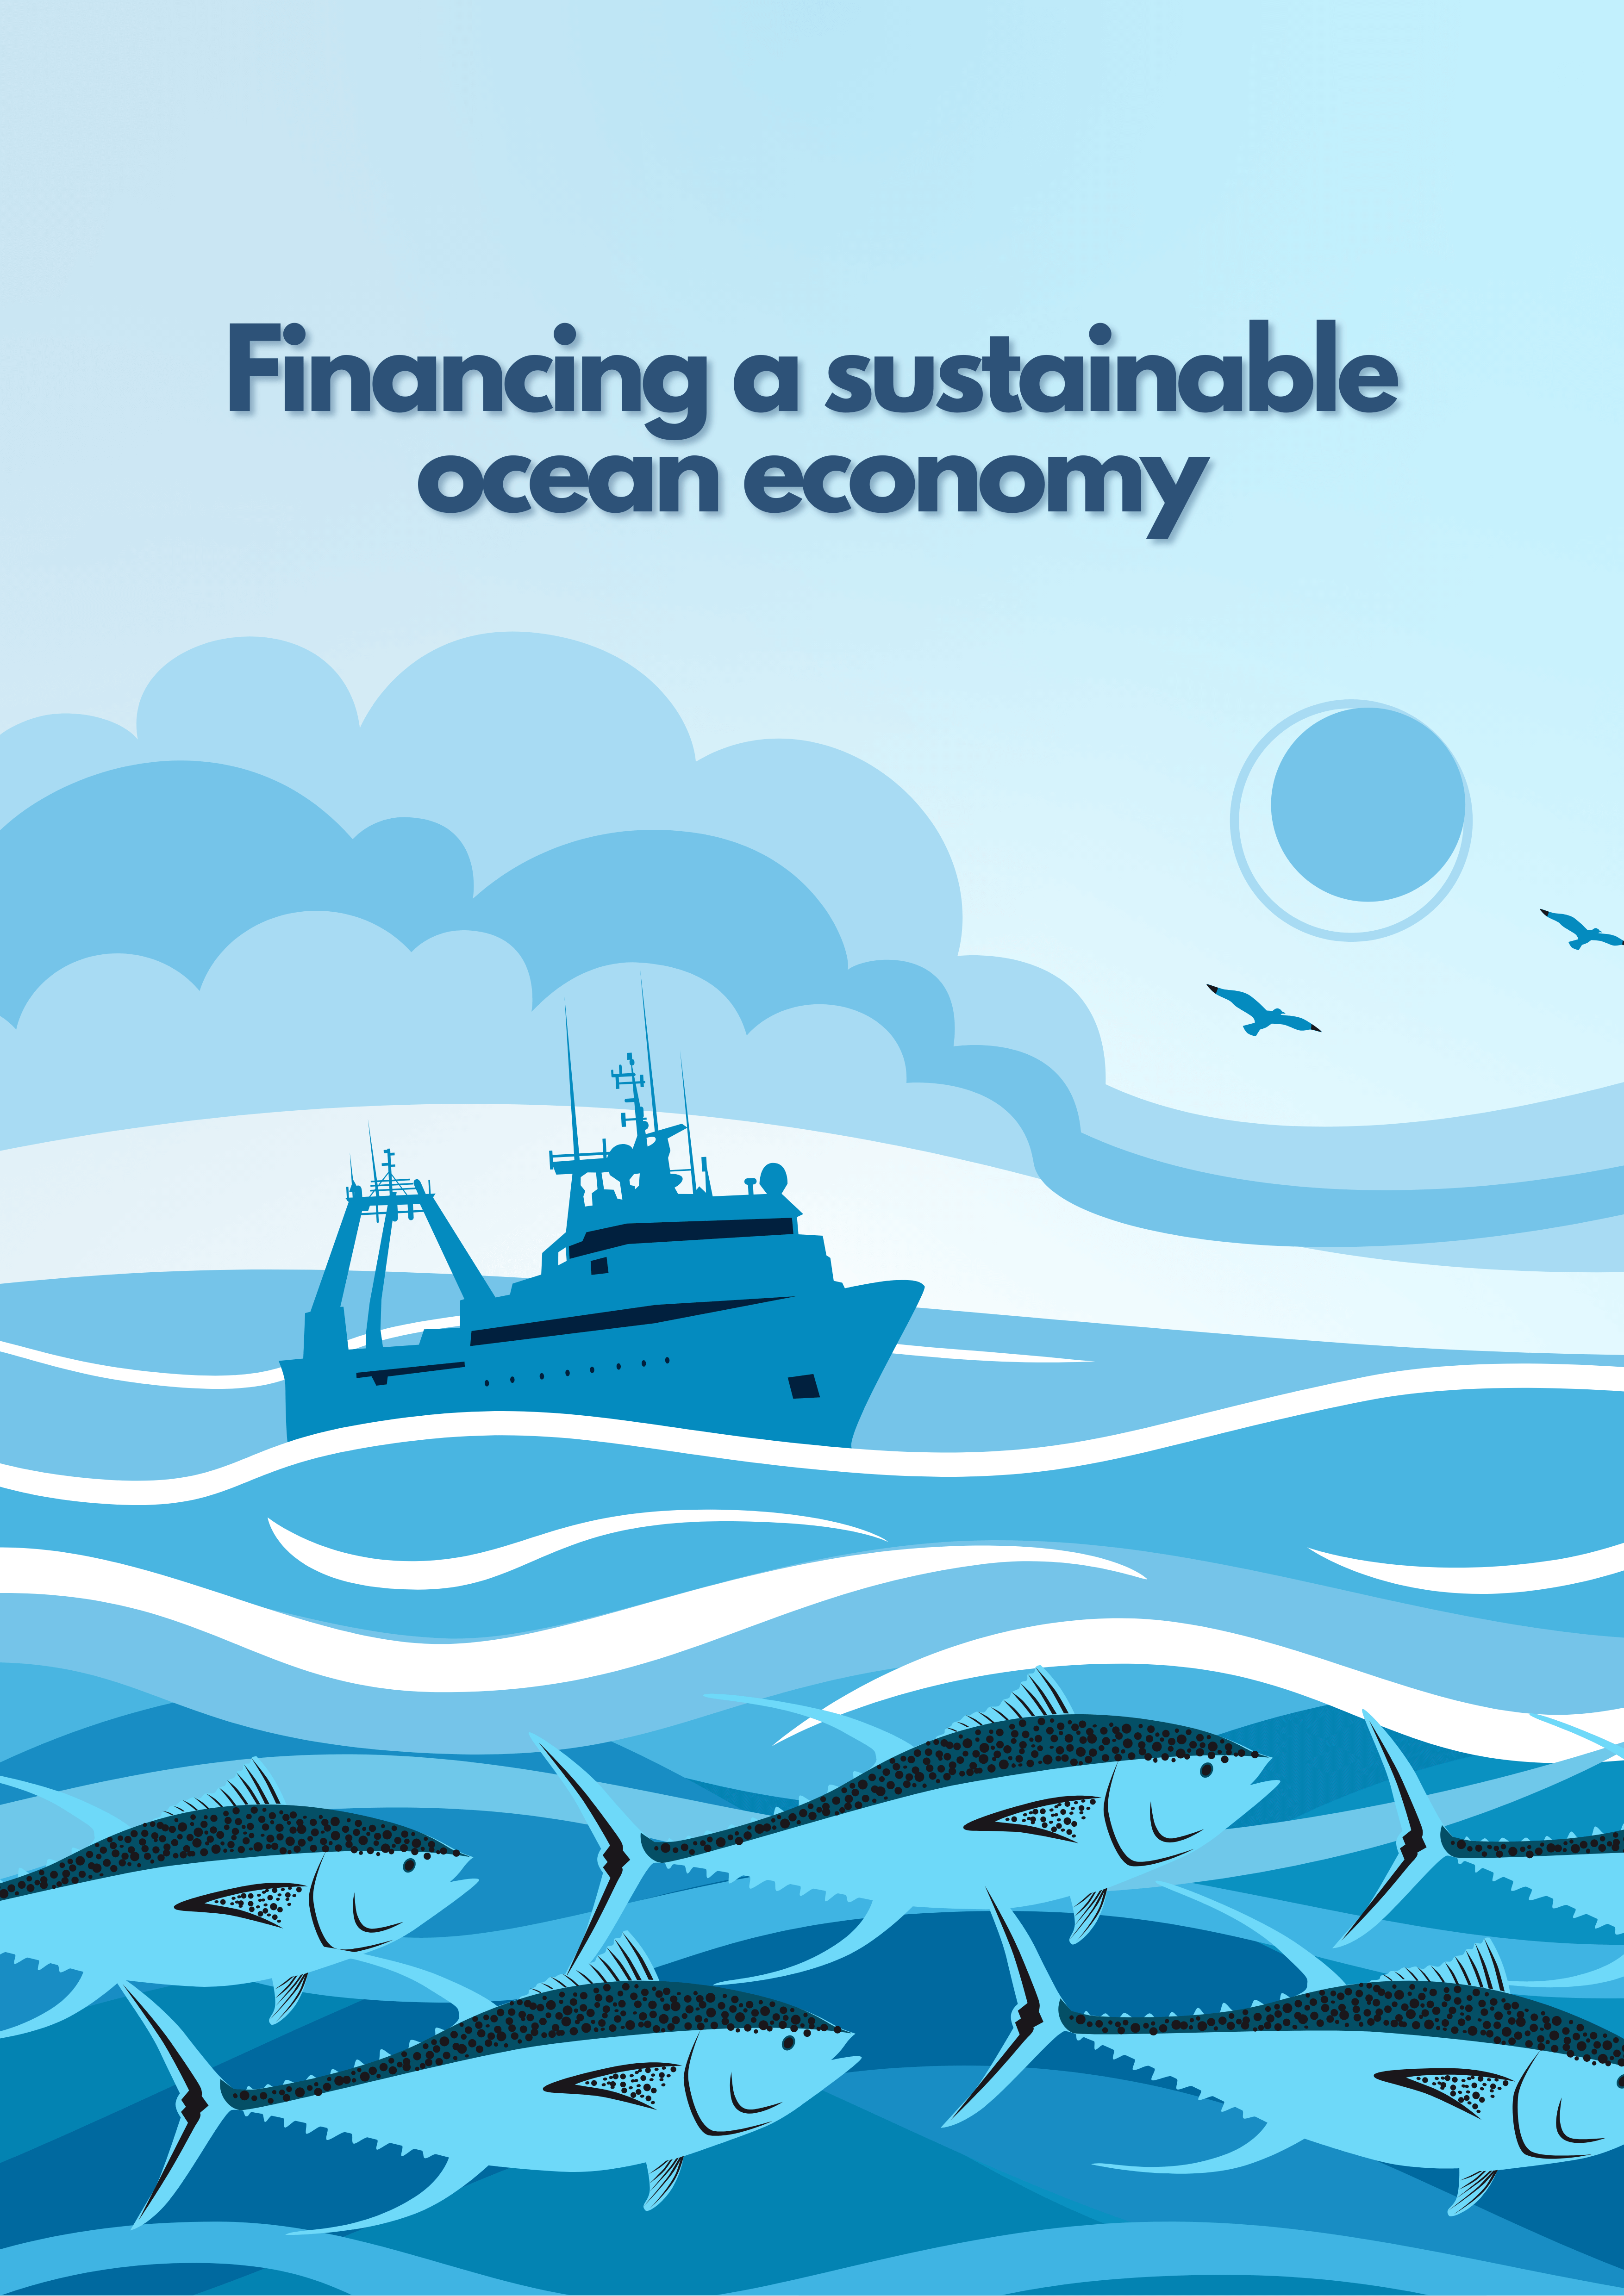 Study identifies major barriers to financing a sustainable ocean economy